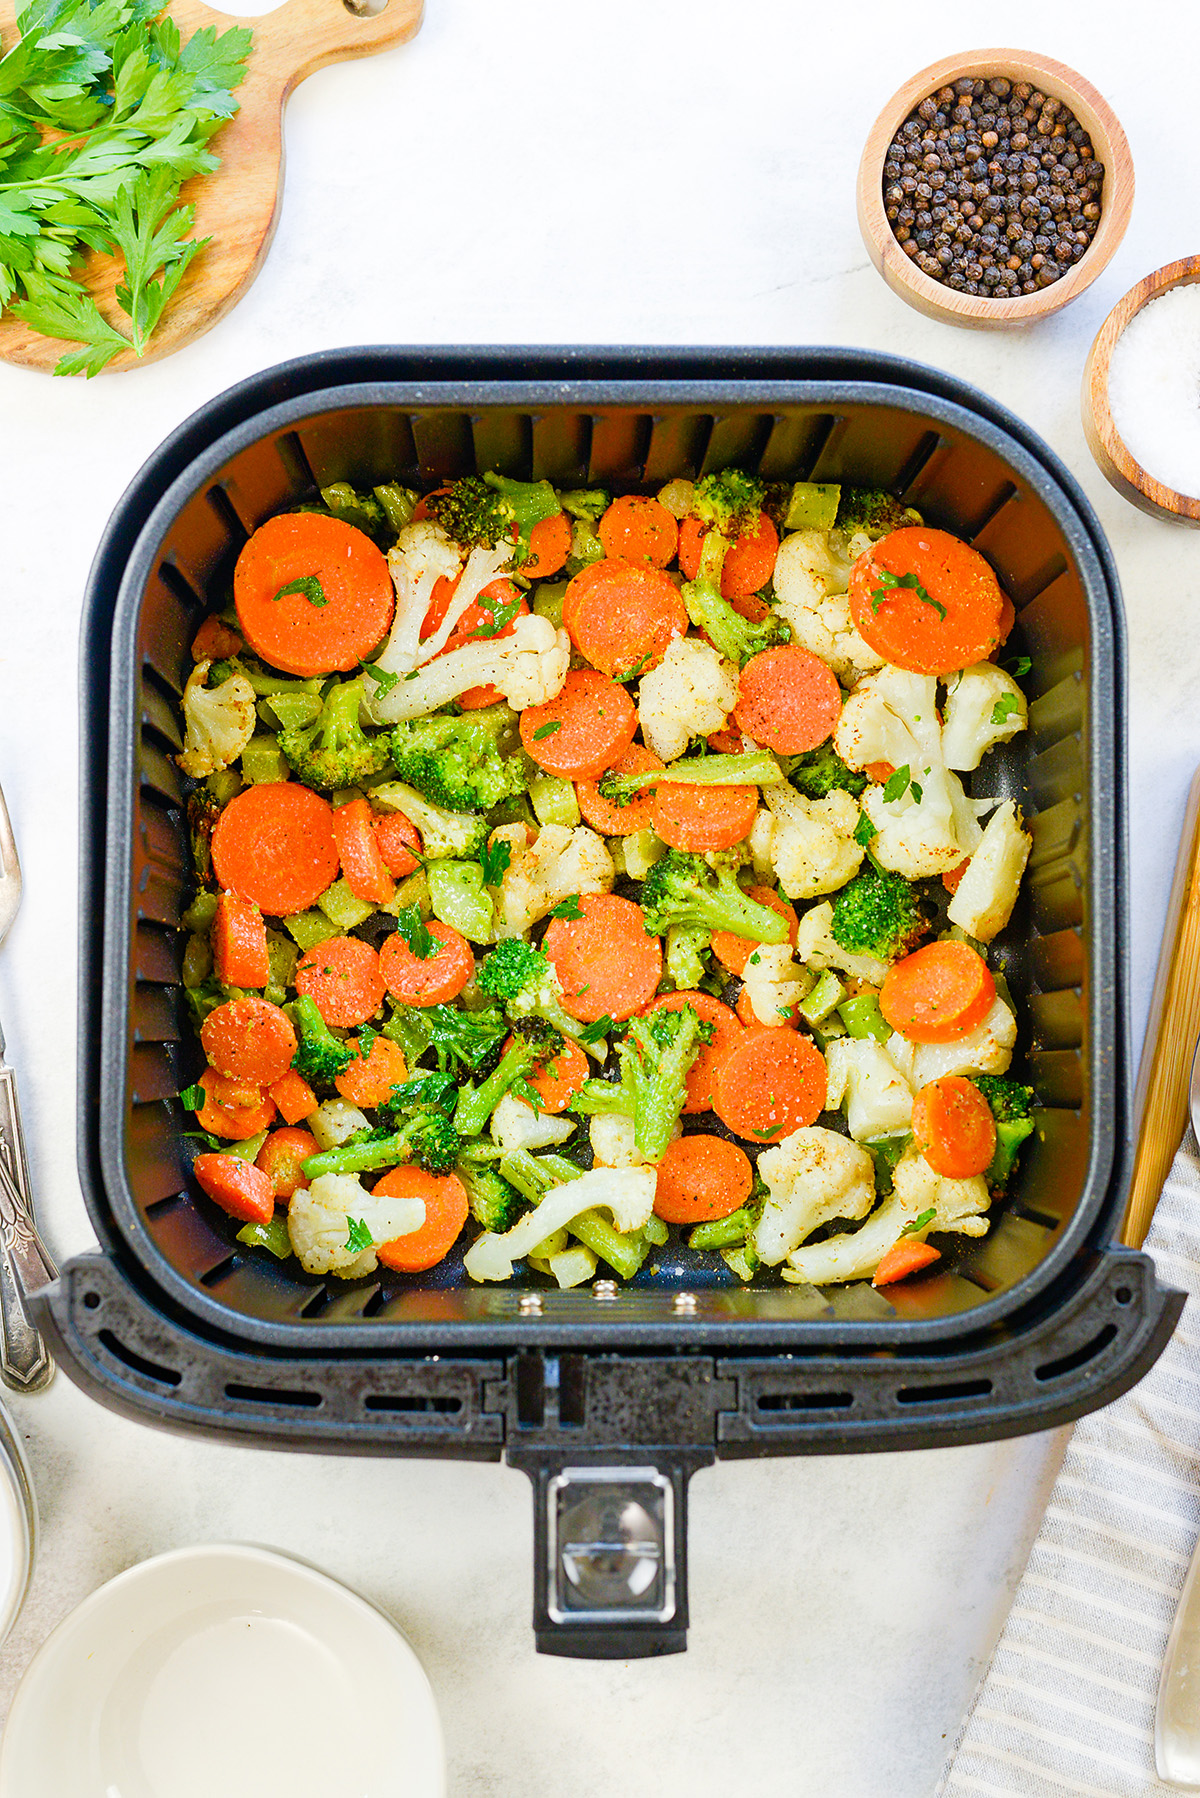 Overhead view of cooked veggies in an air fryer basket.